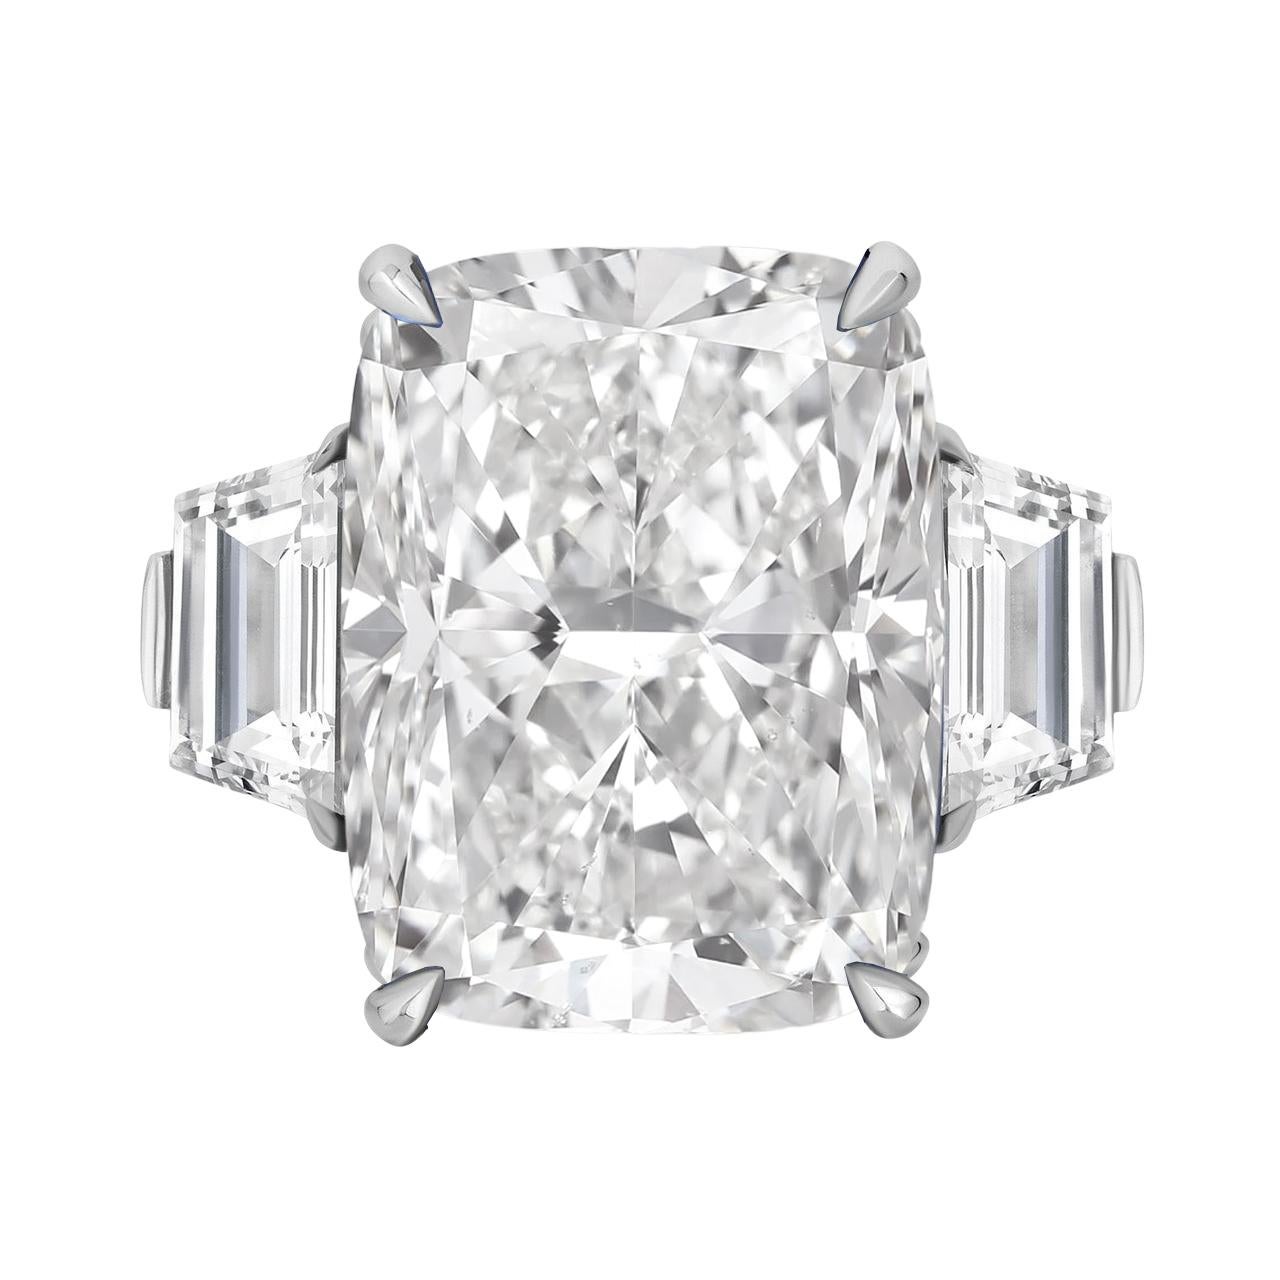 An exquisite GIA certified 6 carat cushion cut diamond ring
F Color
VS2 Clarity
Excellent Polish
Excellent Symmetry
None  Fluorescence

